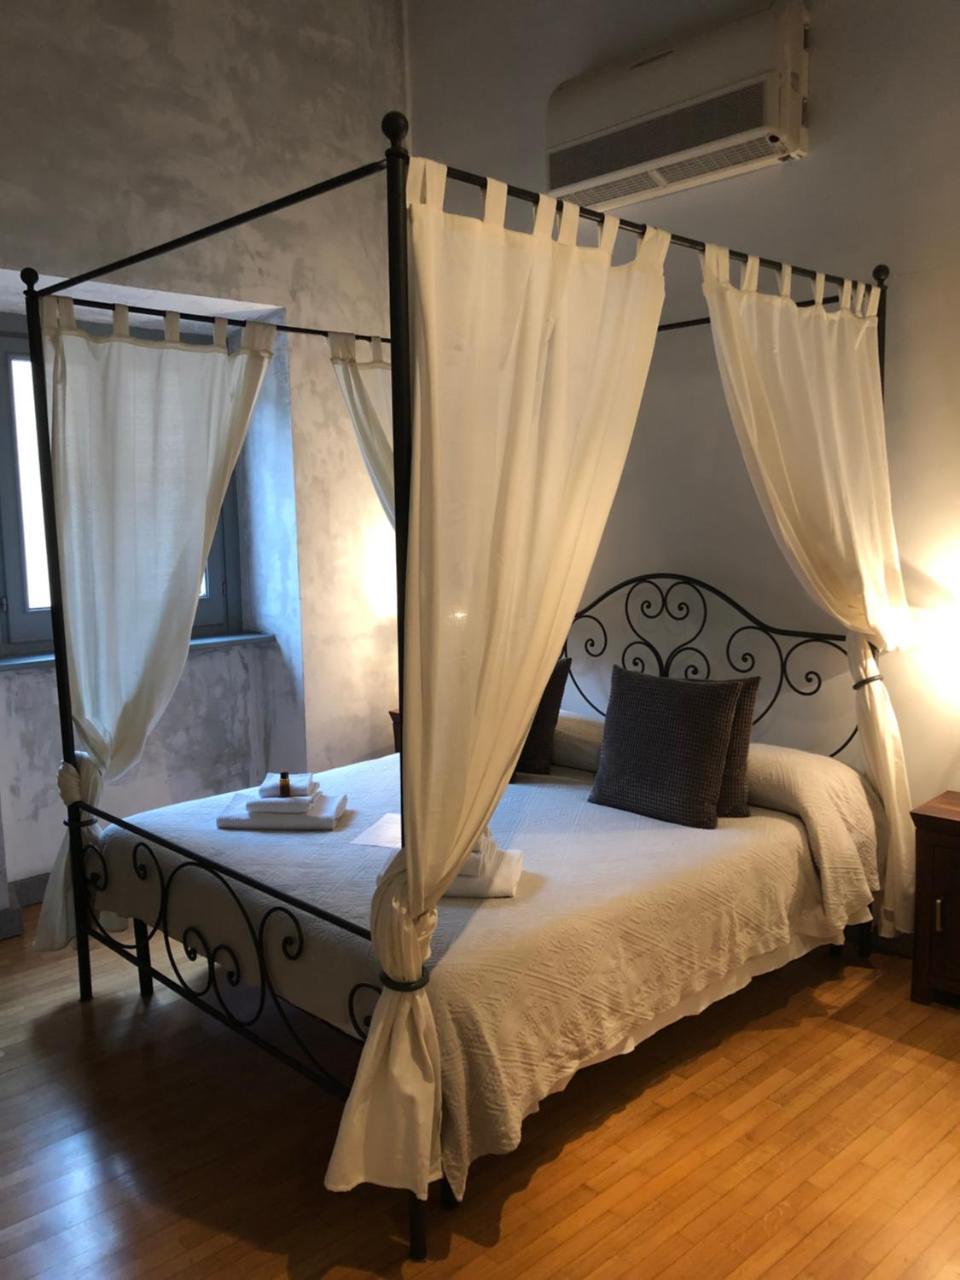 Piazza Del Popolo Rooms 로마 외부 사진